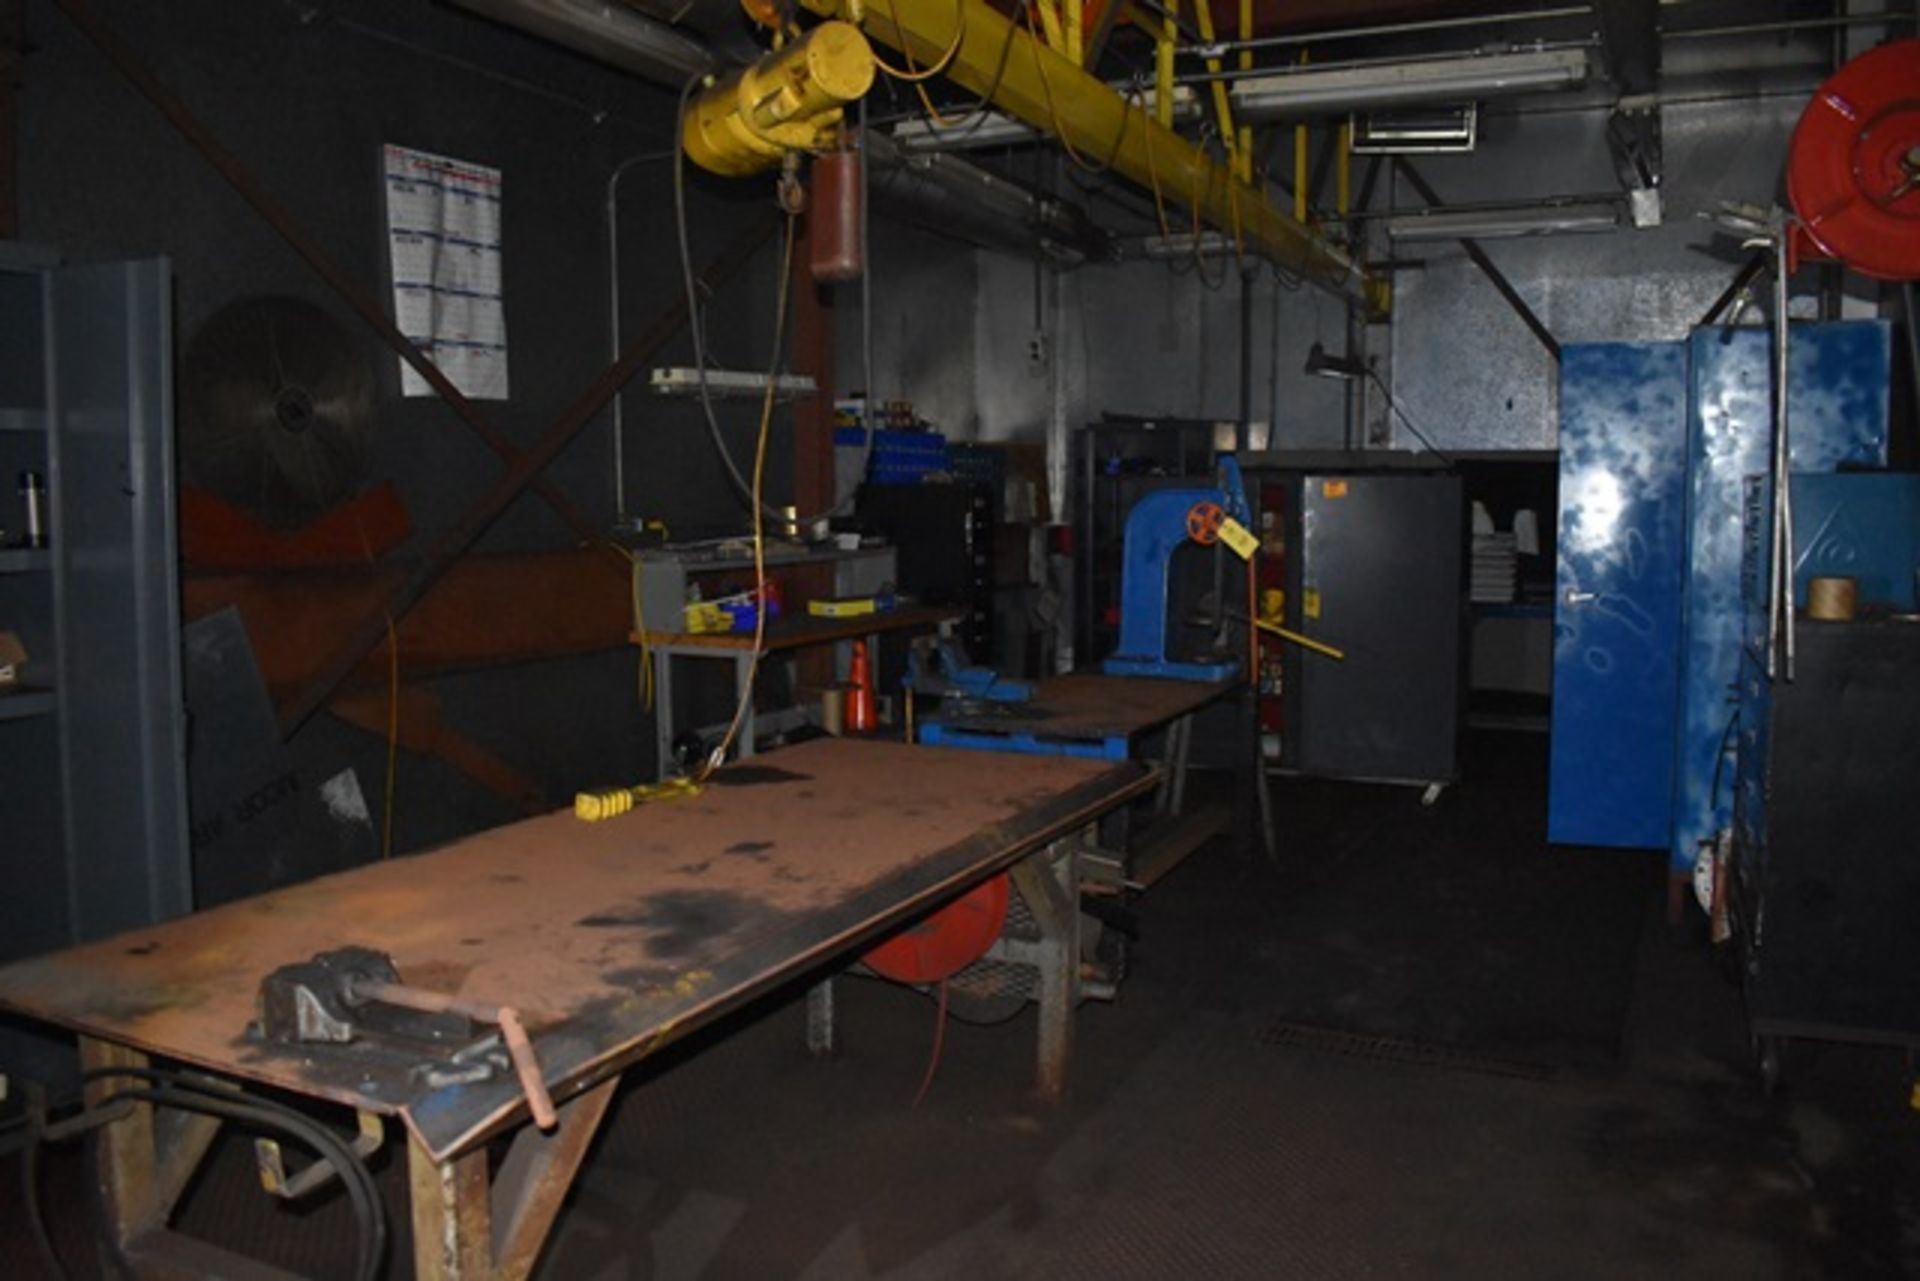 (Lot) Coffee Grinding Shop, contents includes chain hoists, storage cabinets, work tables, etc.